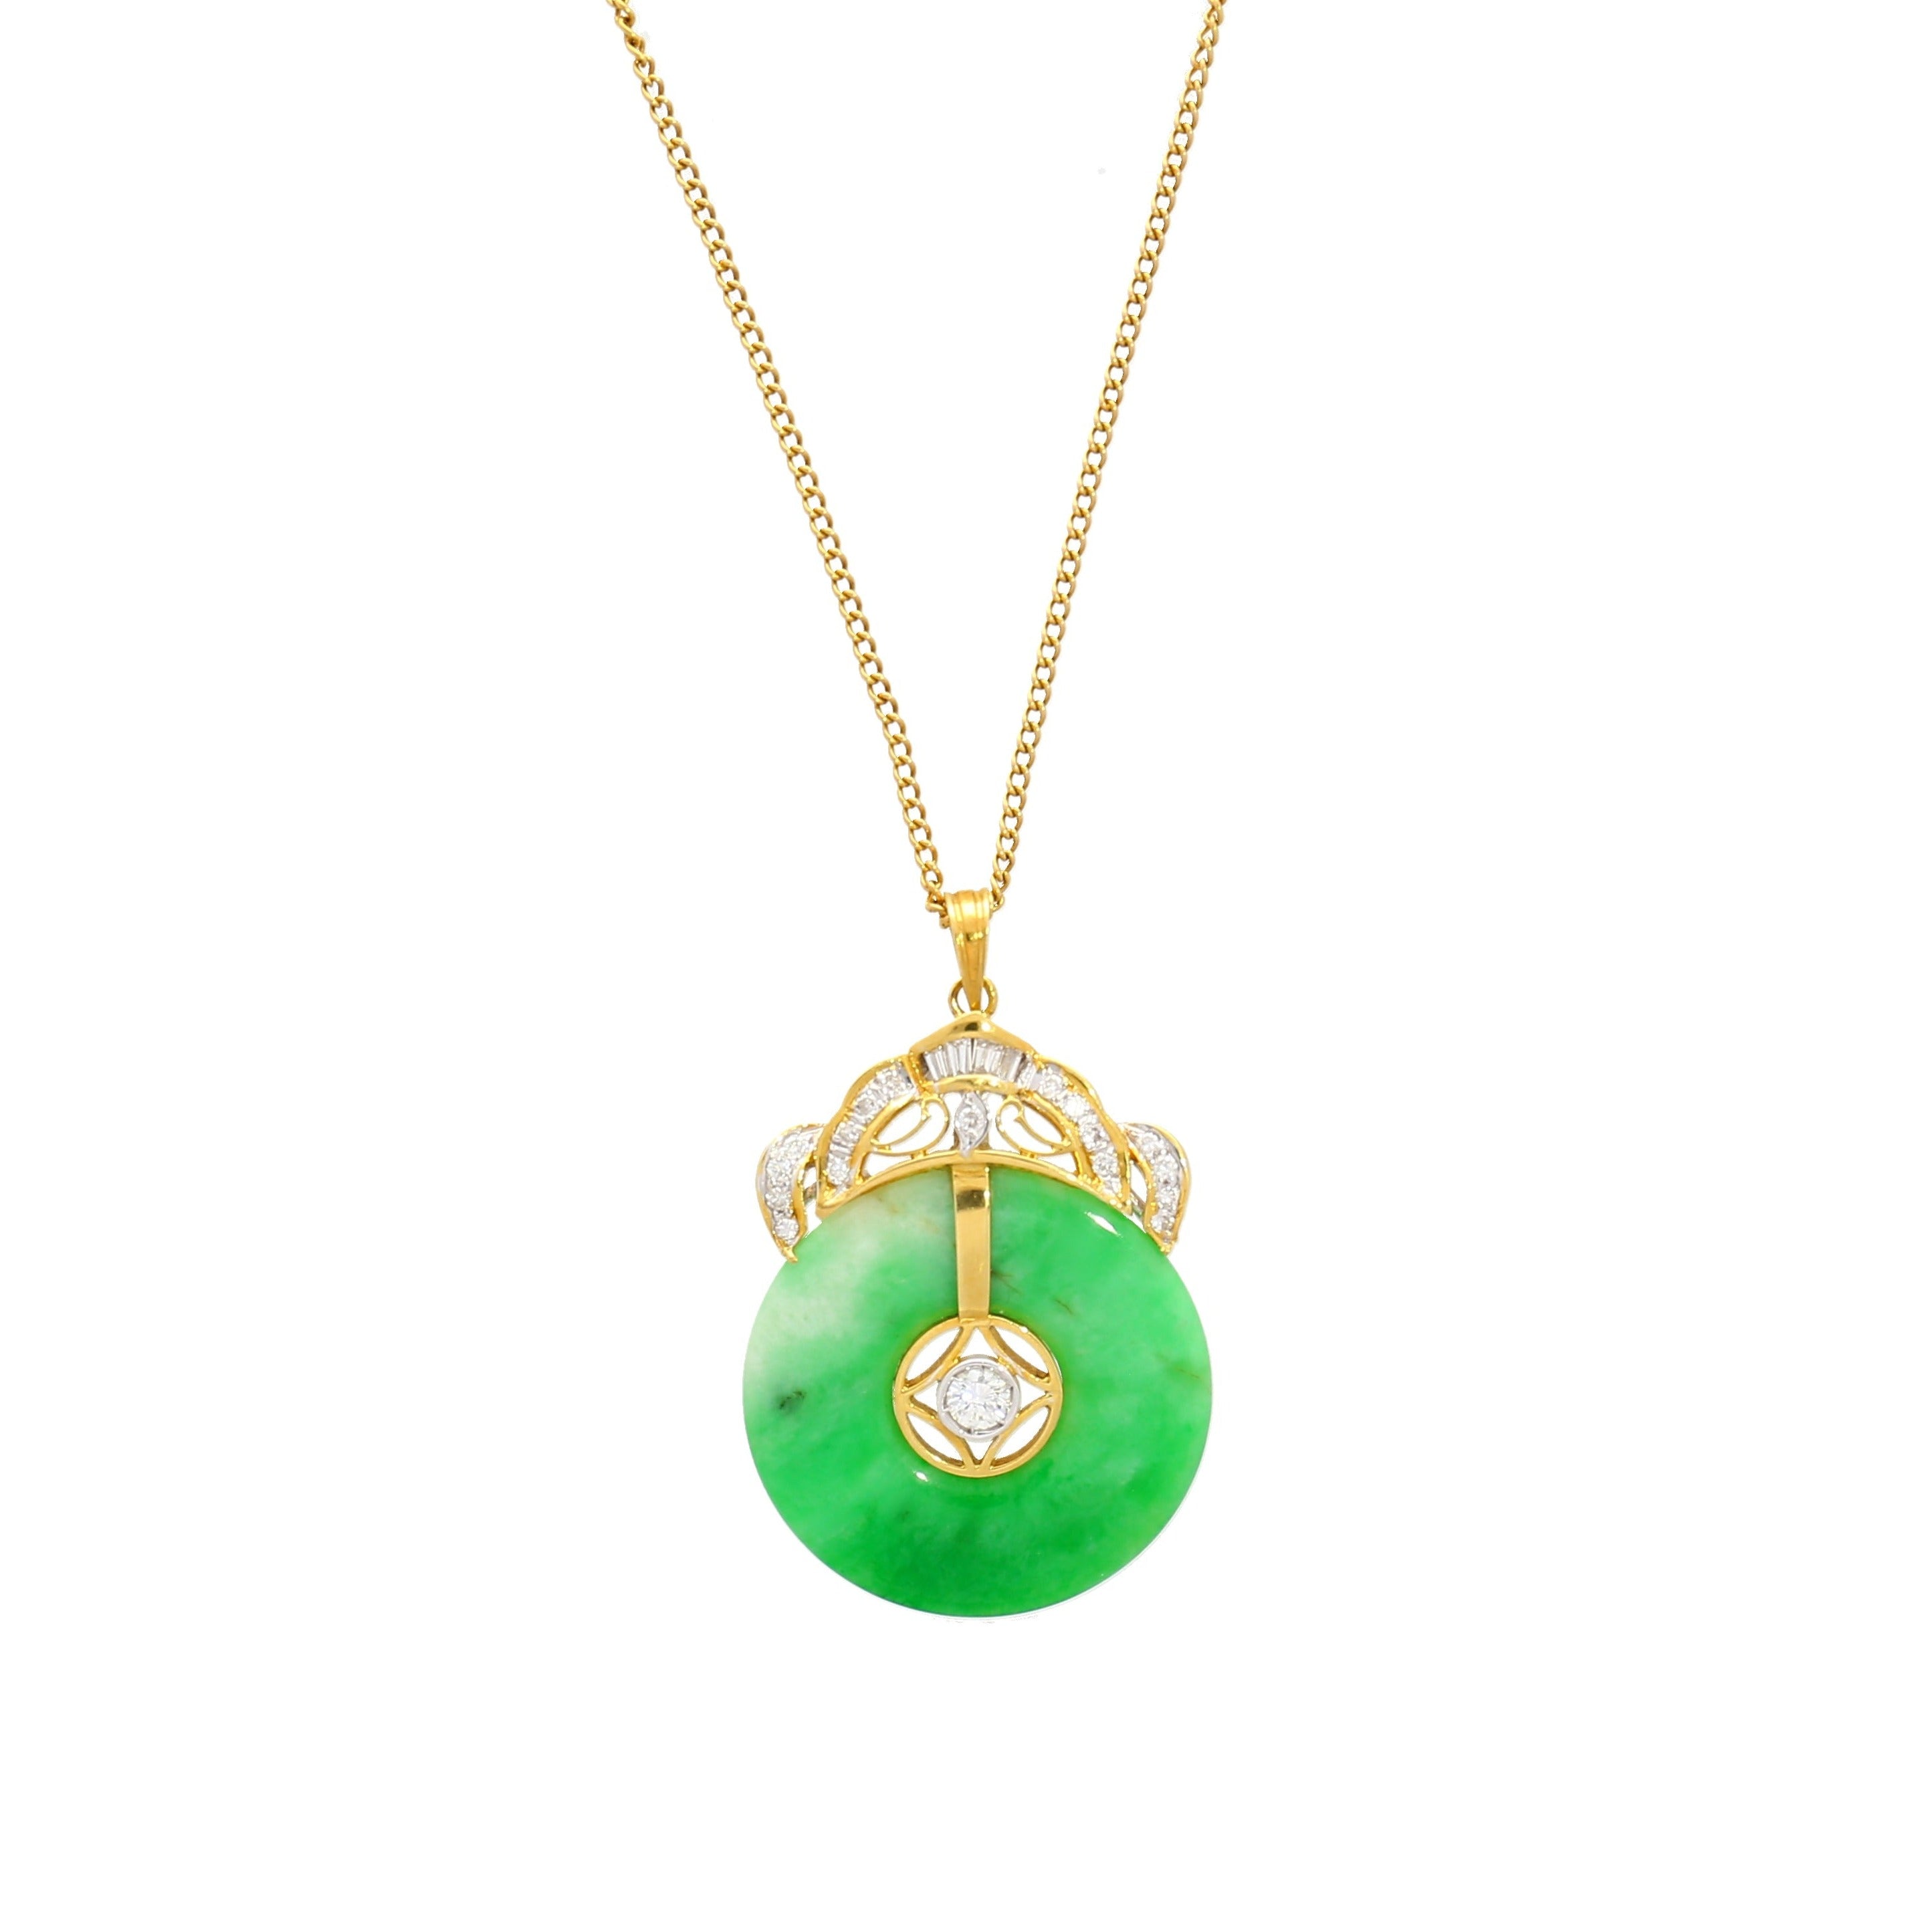 18K-Gold-Jadeite-Jade-Disc-Pendant-Necklace-with-Circular-Jade-and-Baguette-With-Round-Cut-Diamonds-Necklace.jpg